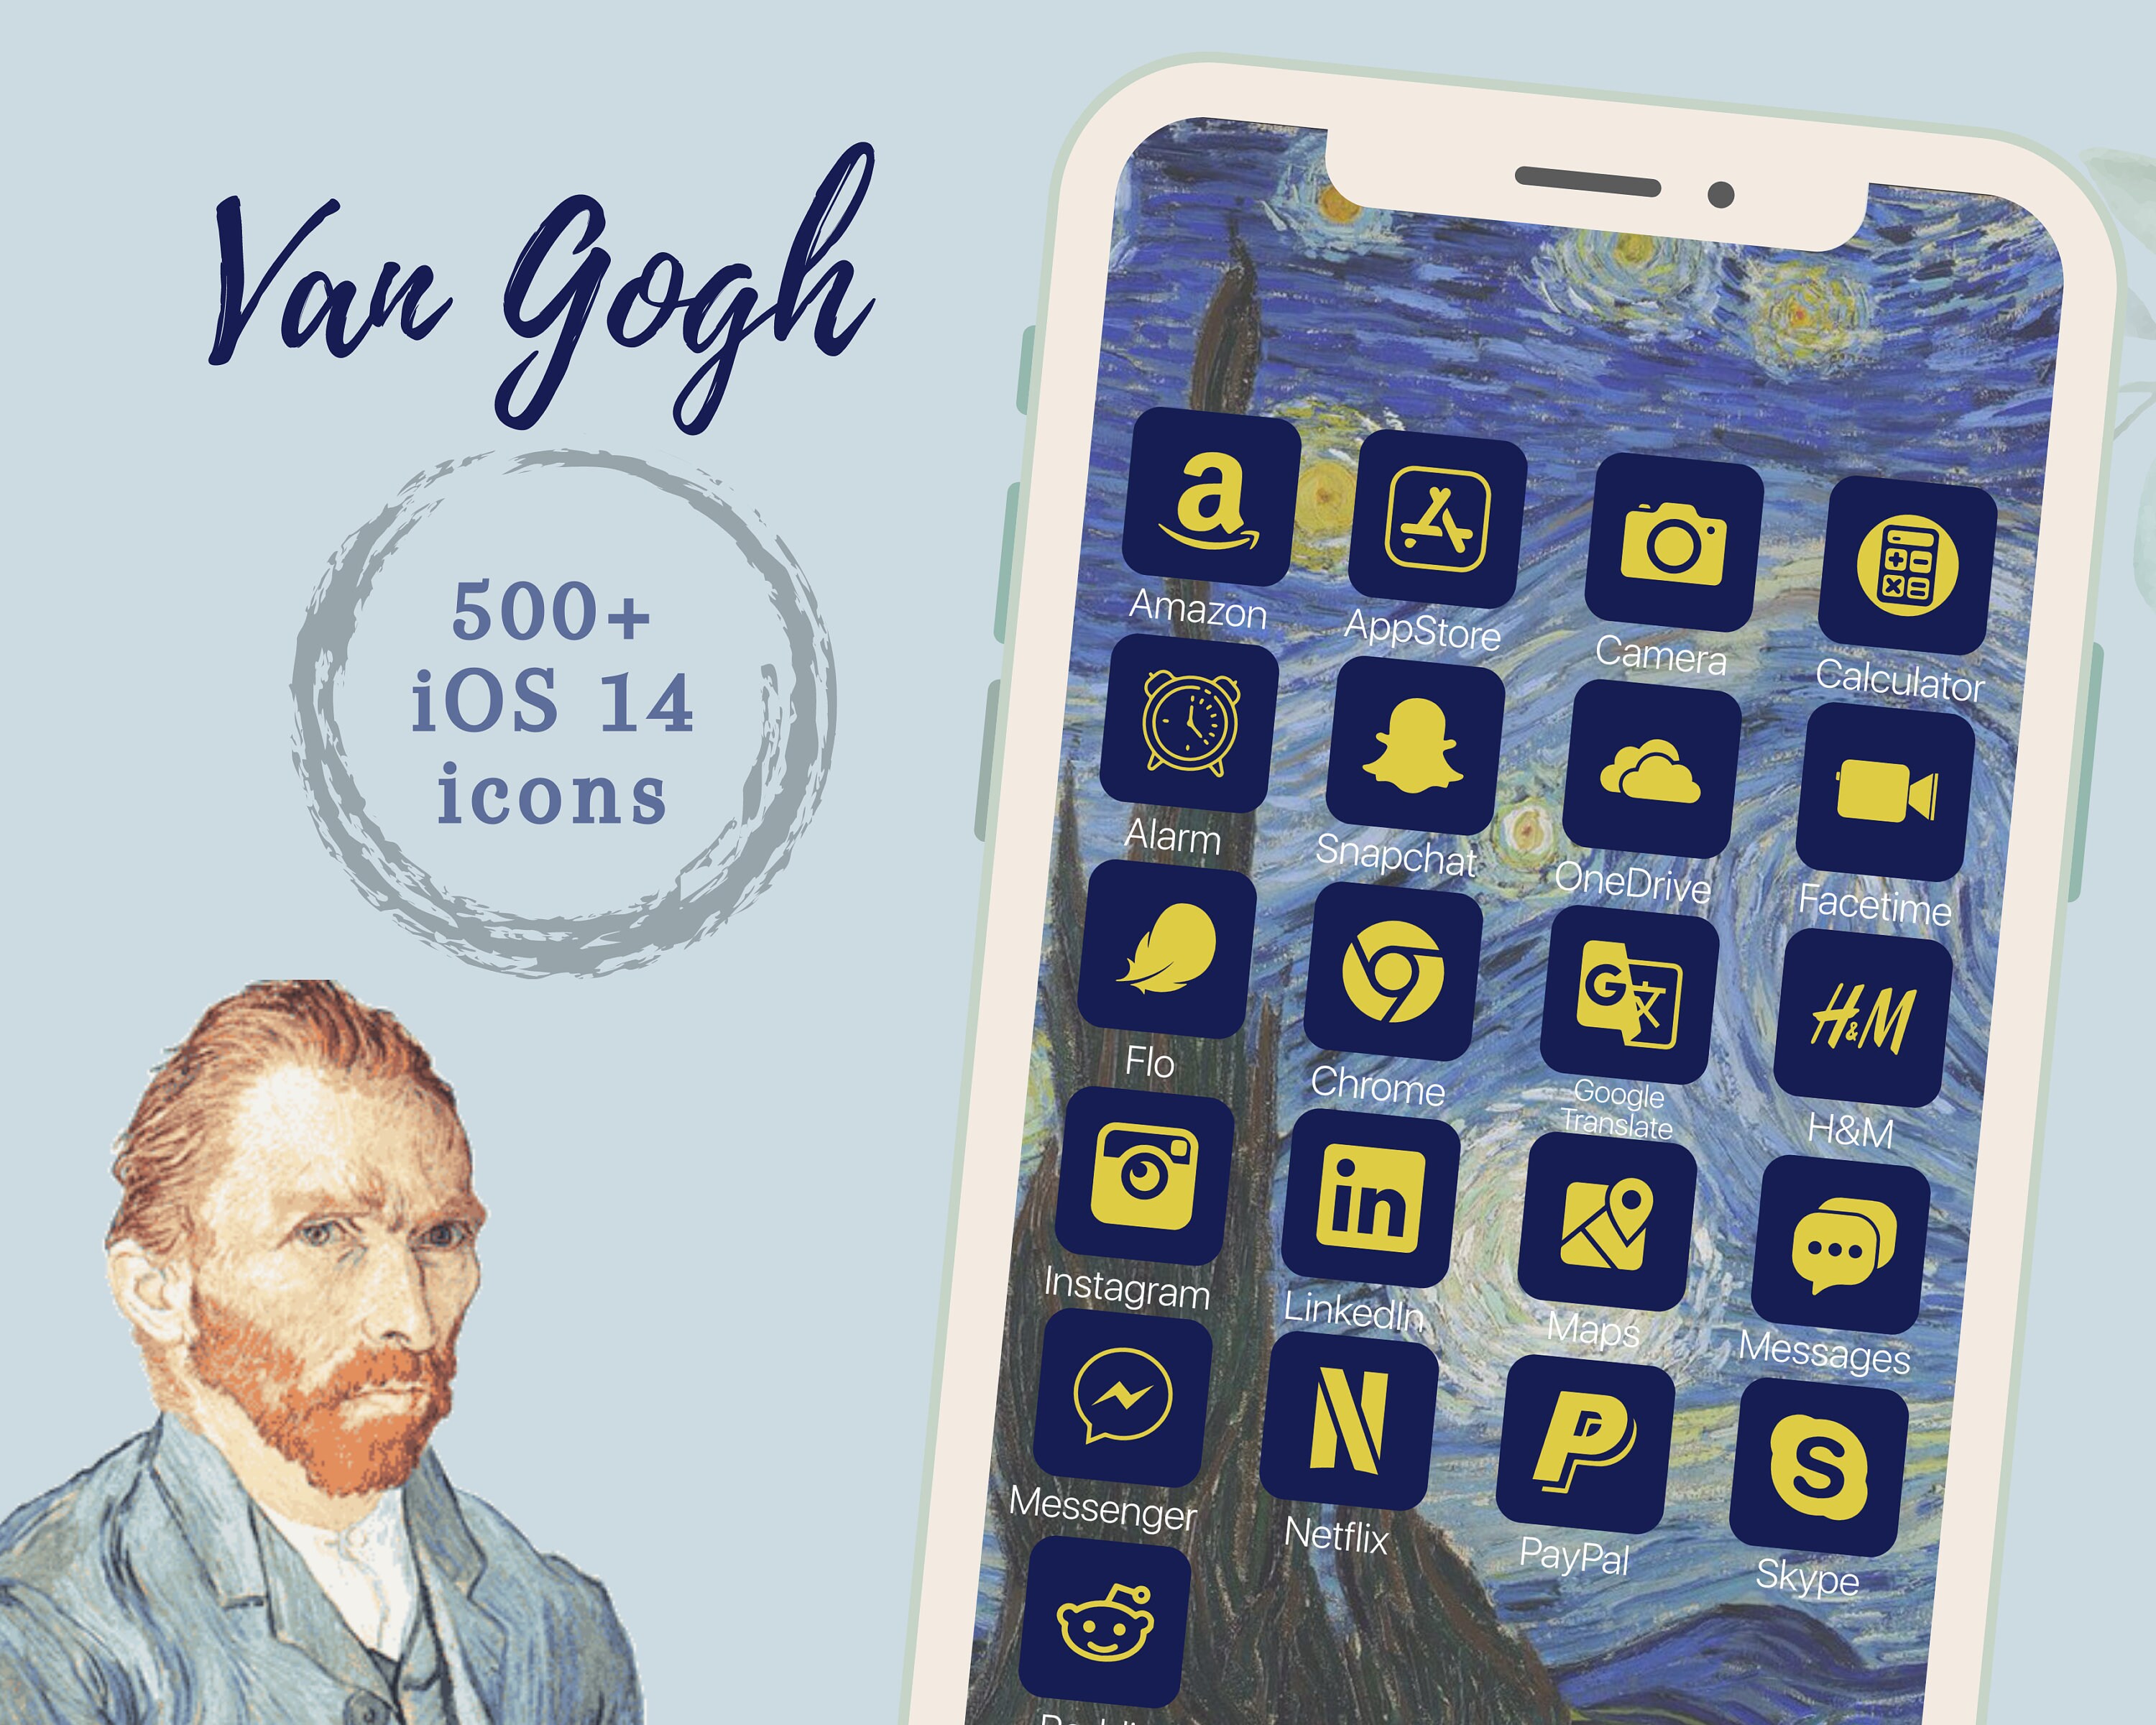 Van Gogh Ios Icon Pack 500 Icons and Wallpapers - Etsy Norway